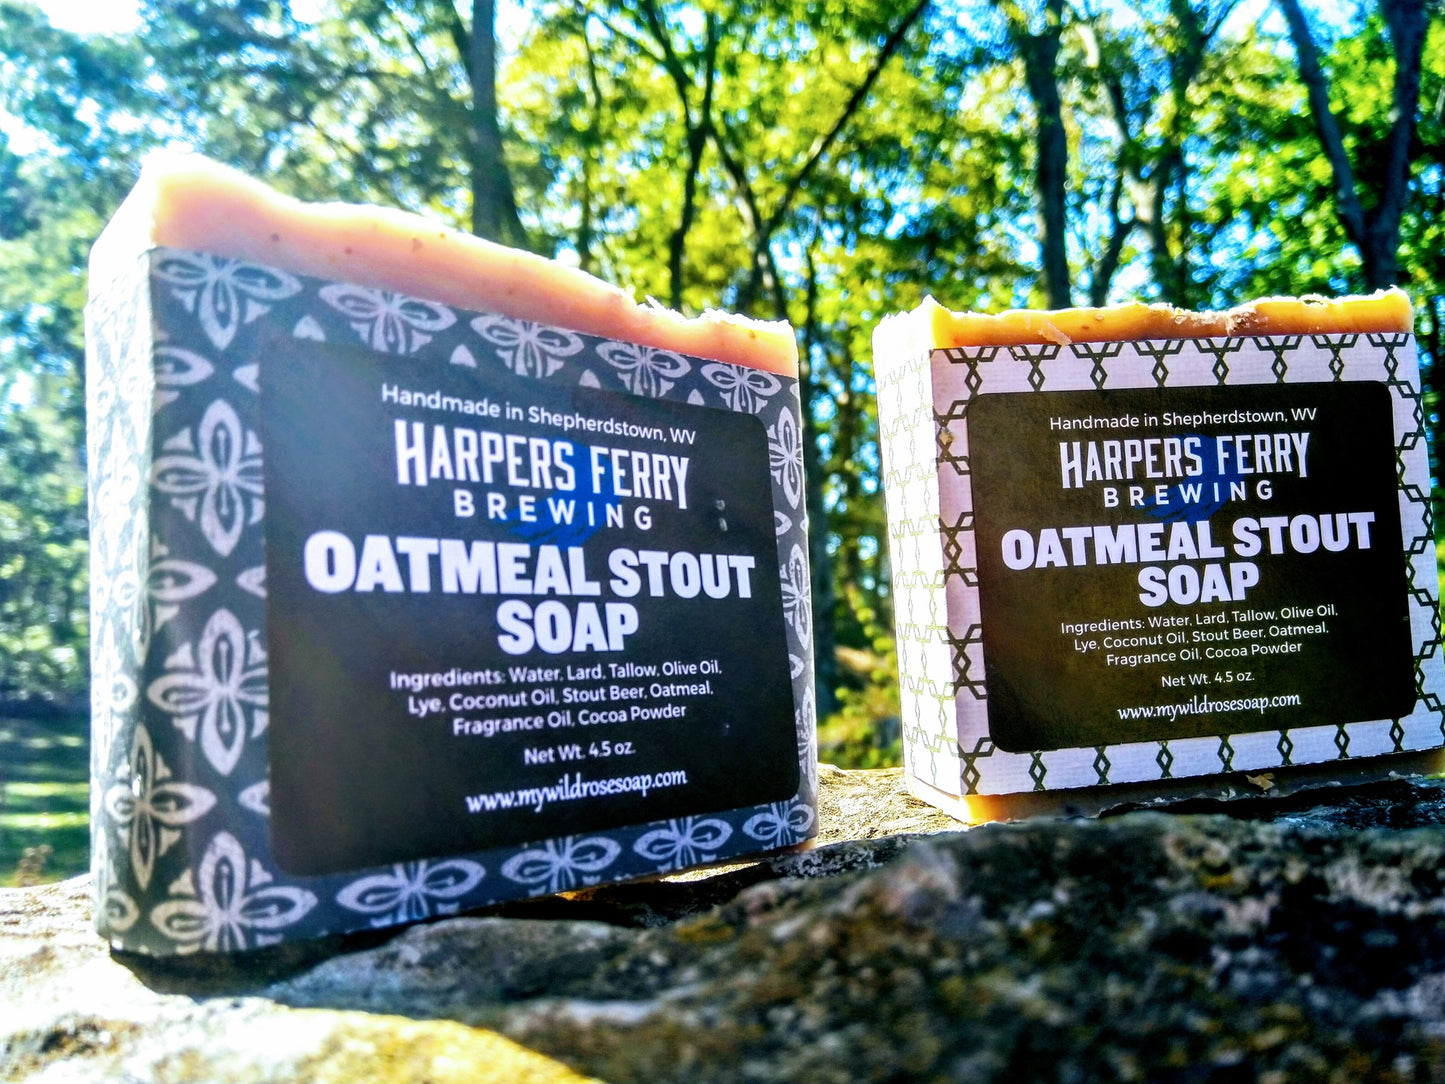 Harpers Ferry Oatmeal Stout Soap